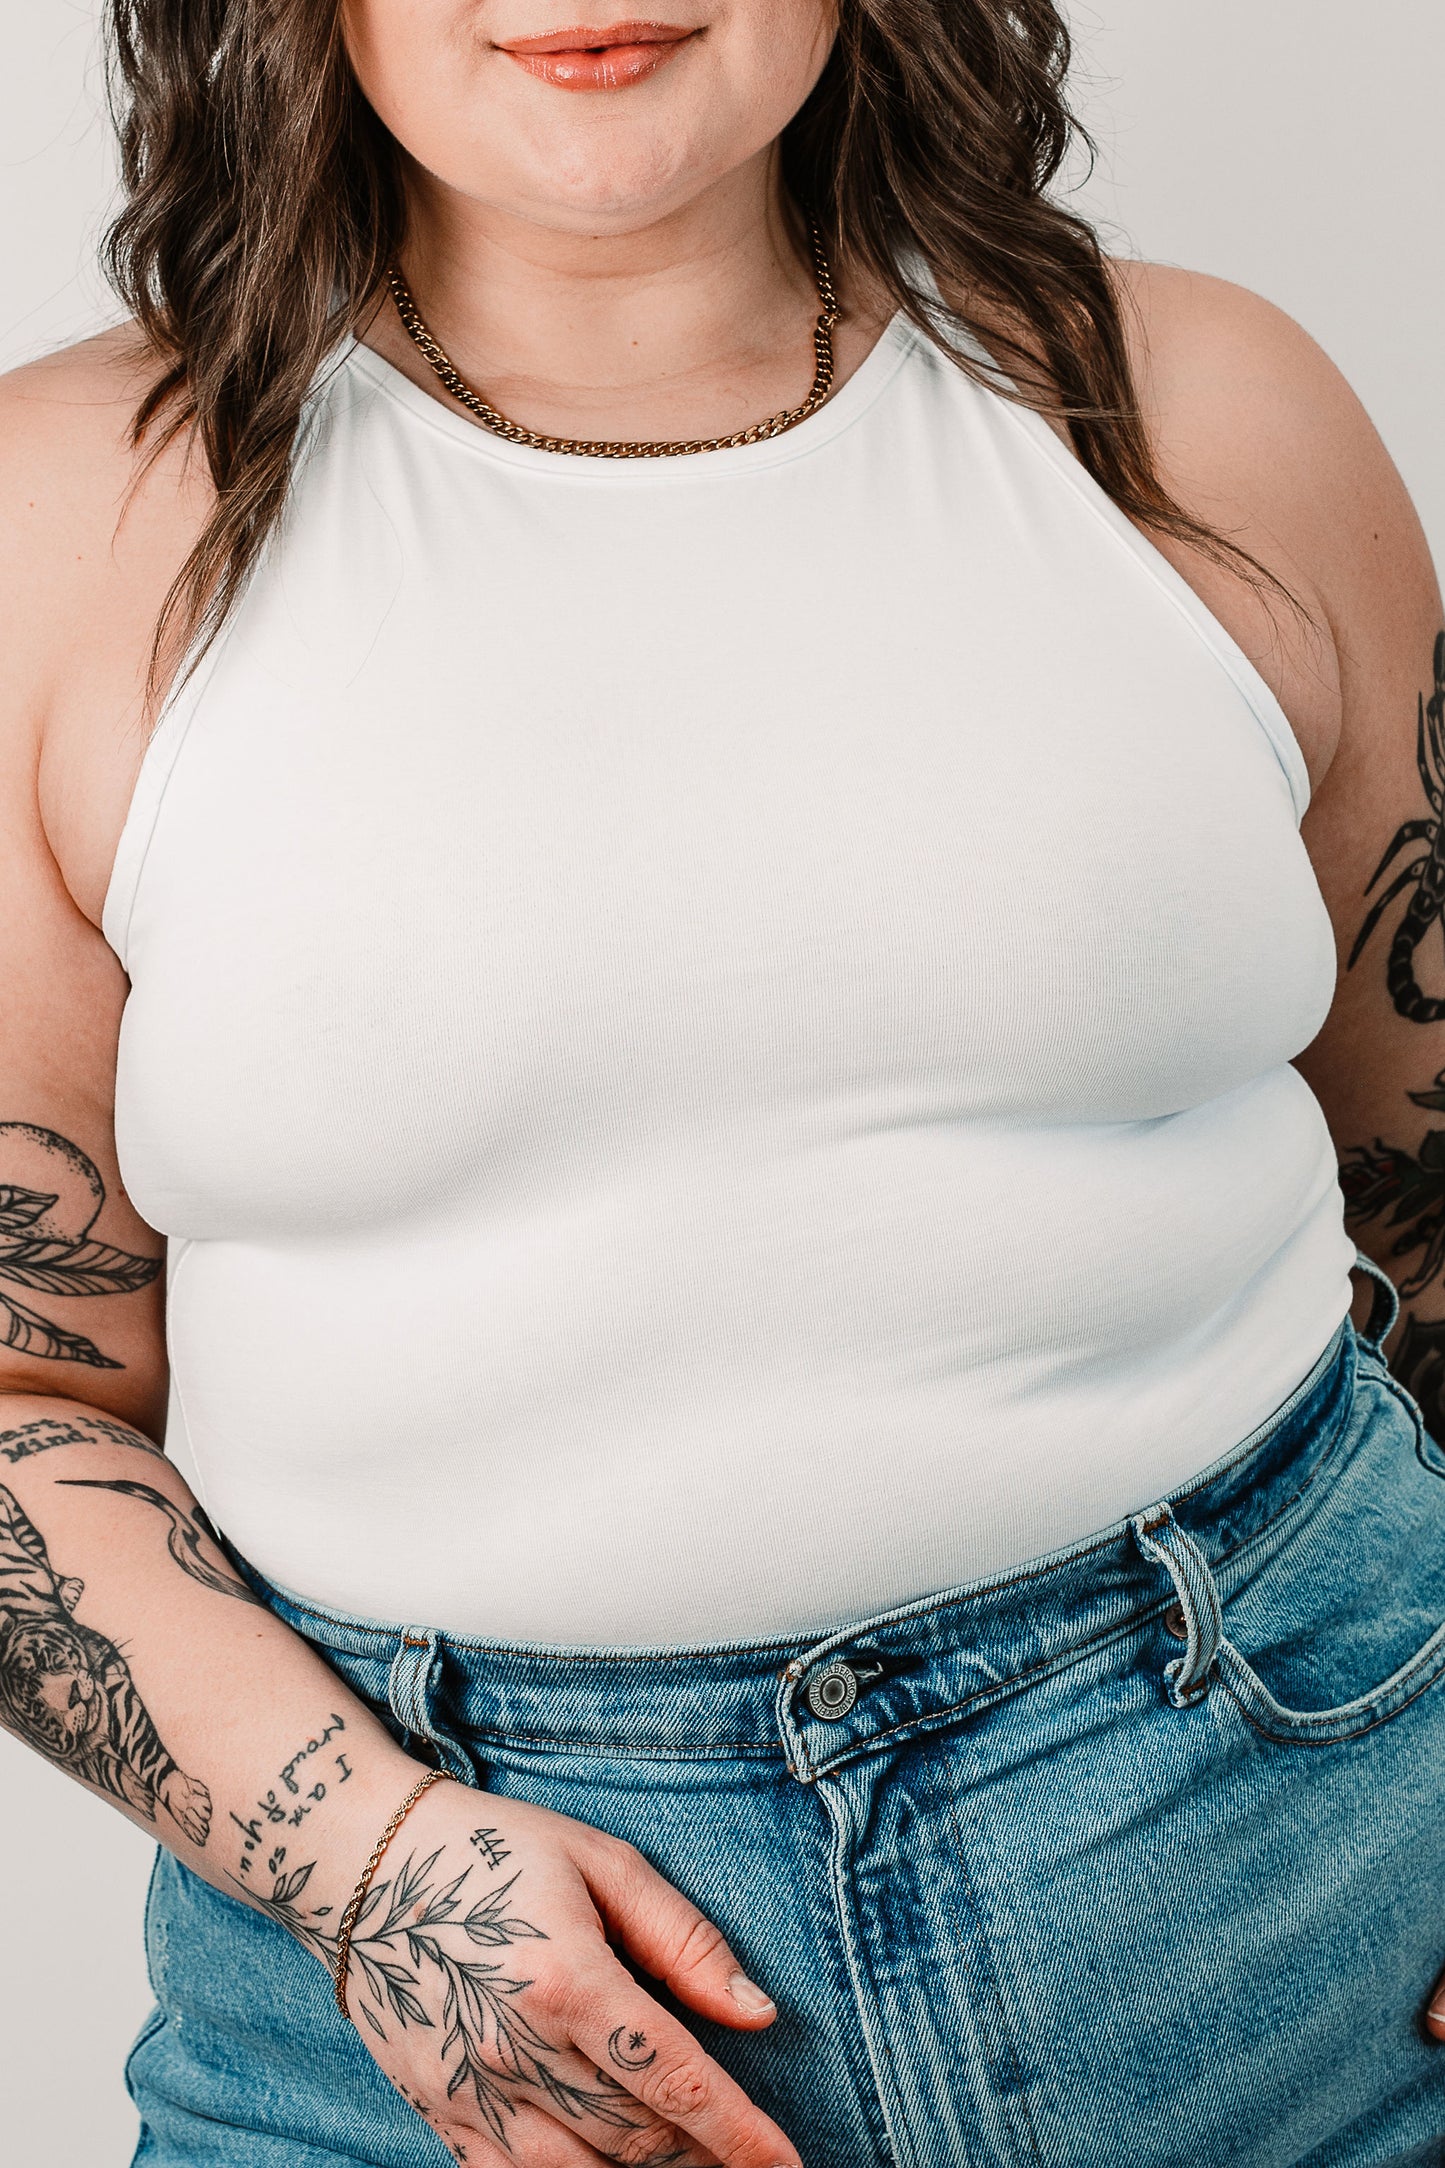 Cara wears the White Willa Bodysuit in size M. Close up.